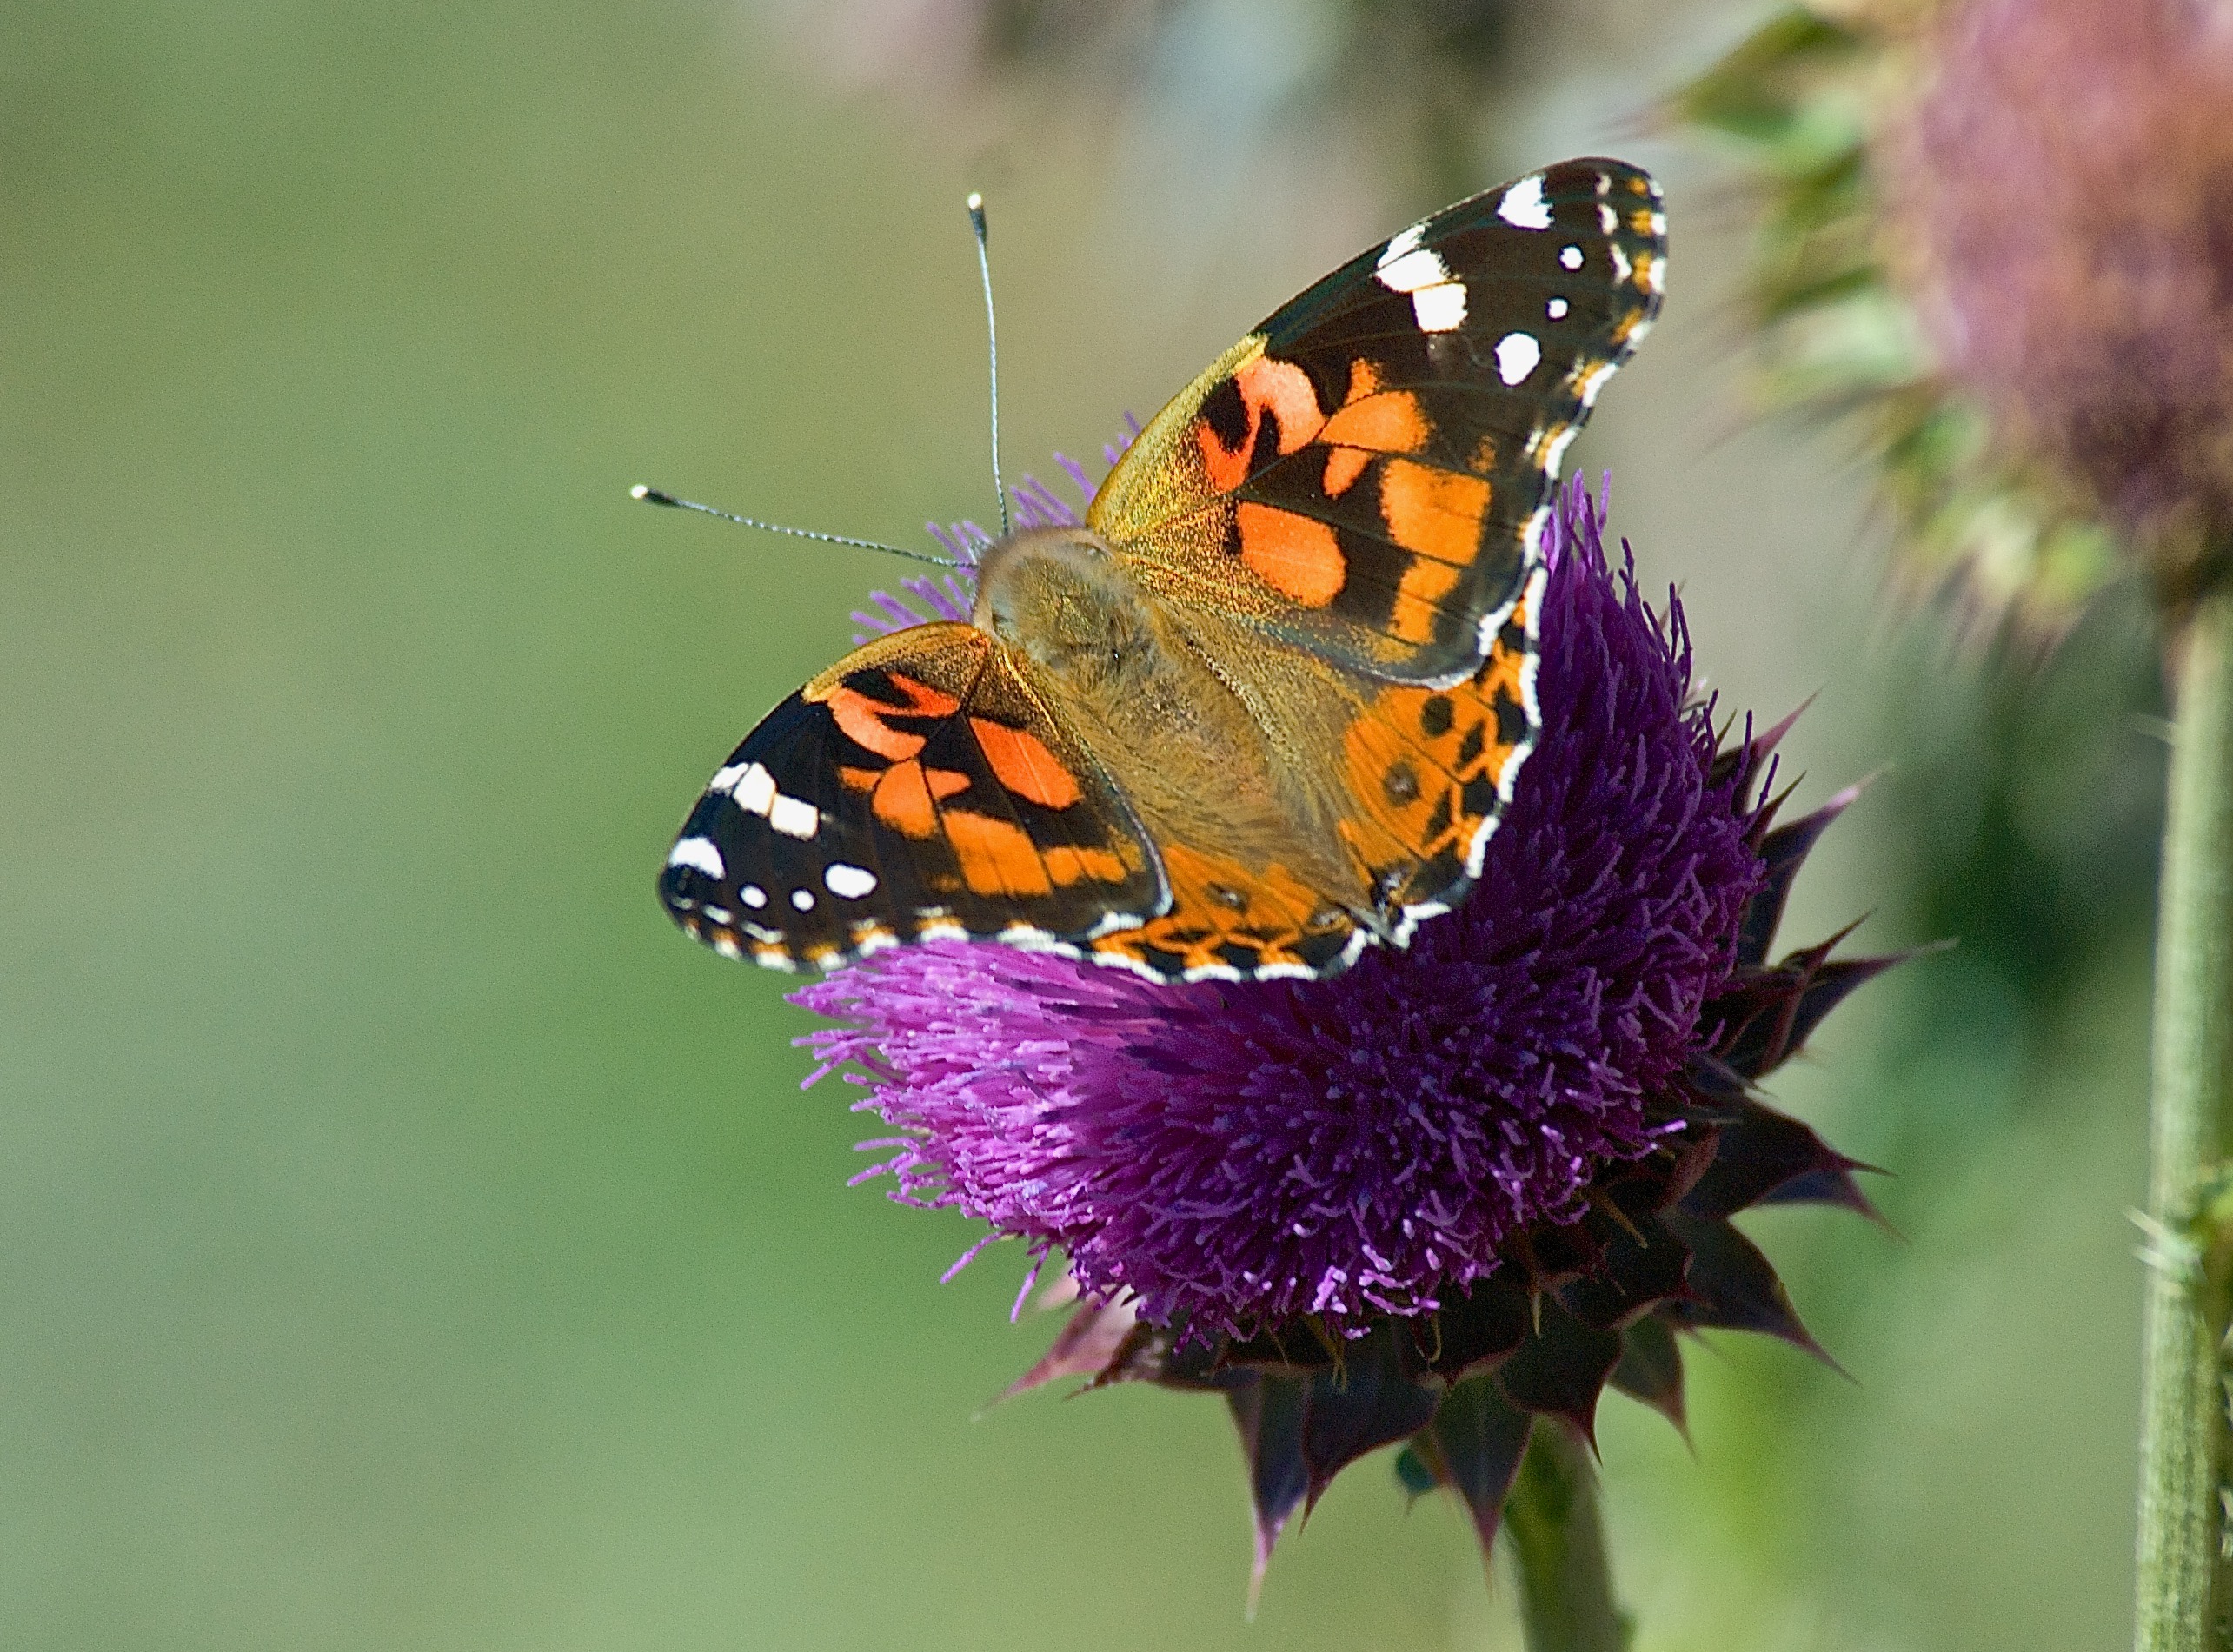 West Coast Lady Butterfly ((Vanessa annabella) on Musk Thistle